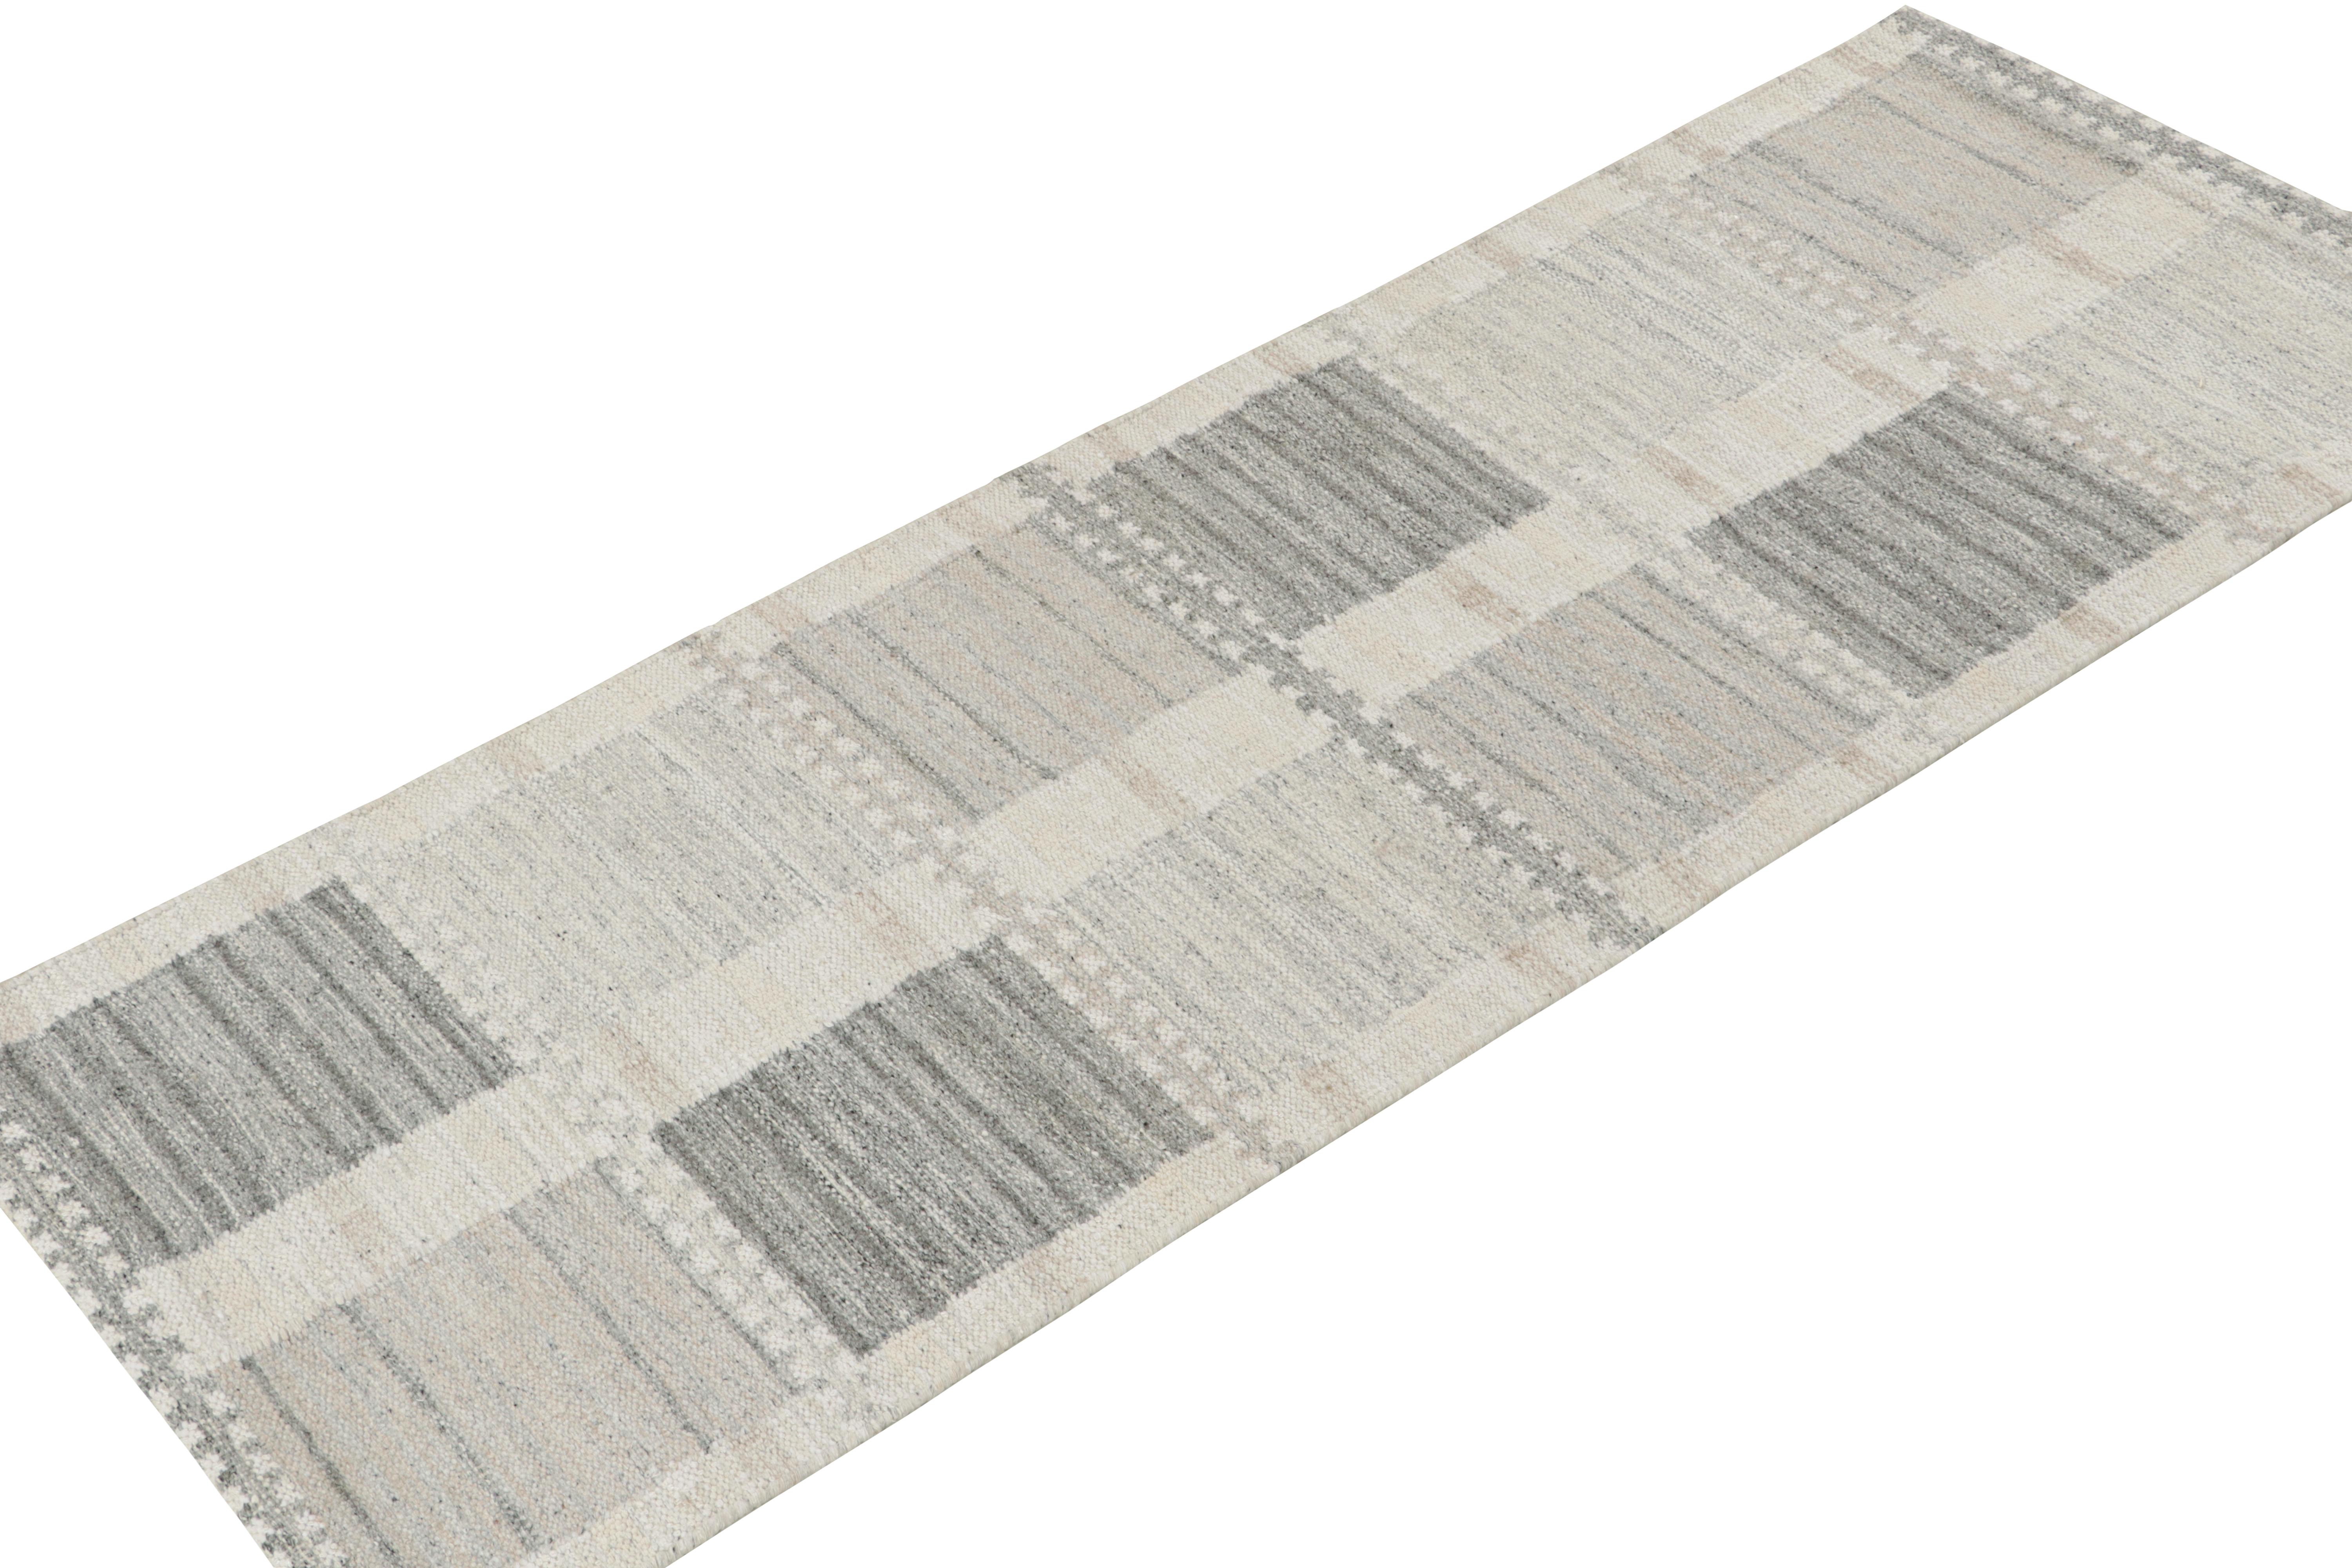 A smart 3x8 Swedish style kilim runner from our award-winning Scandinavian flat weave collection. Handwoven in natural yarn. 

On the Design: 

This rug enjoys a unique texture married to geometric patterns in crisp white and gray. Keen eyes